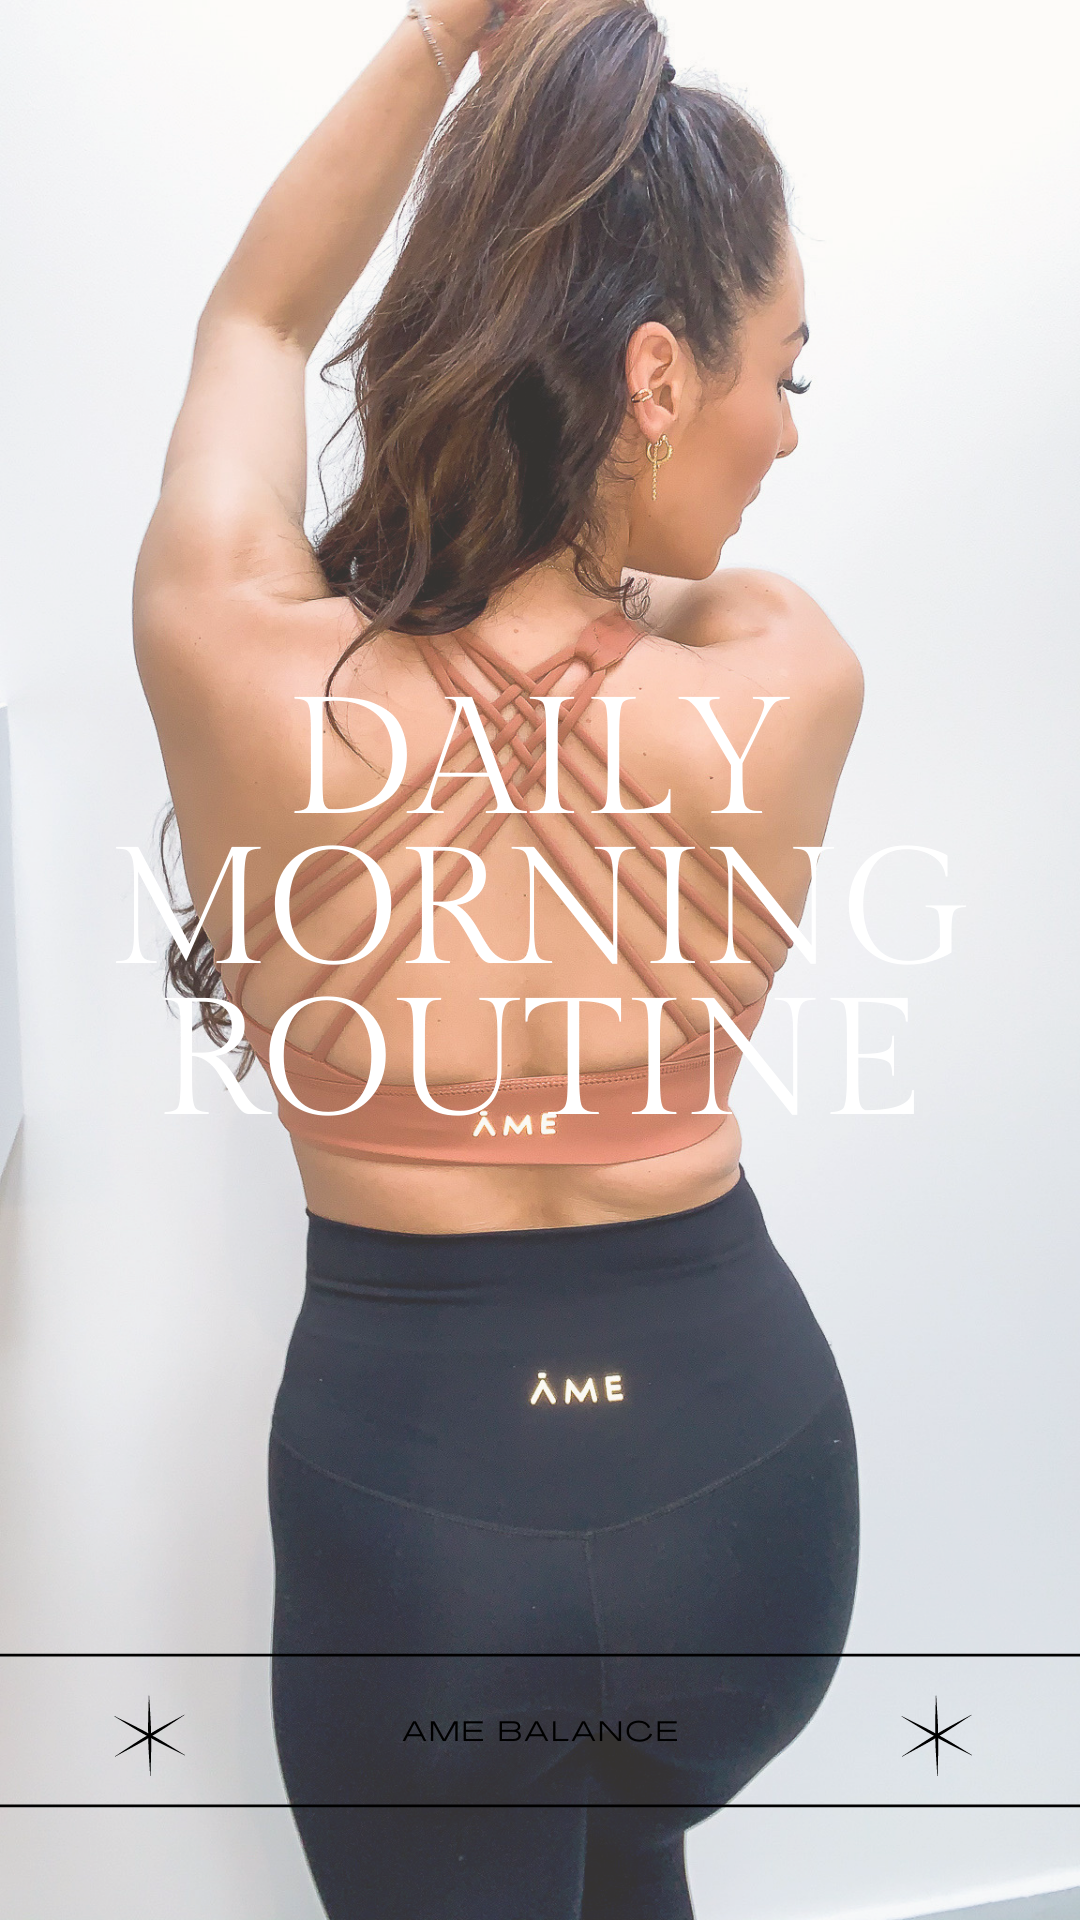 5-Minute Routines for Daily Wellnes